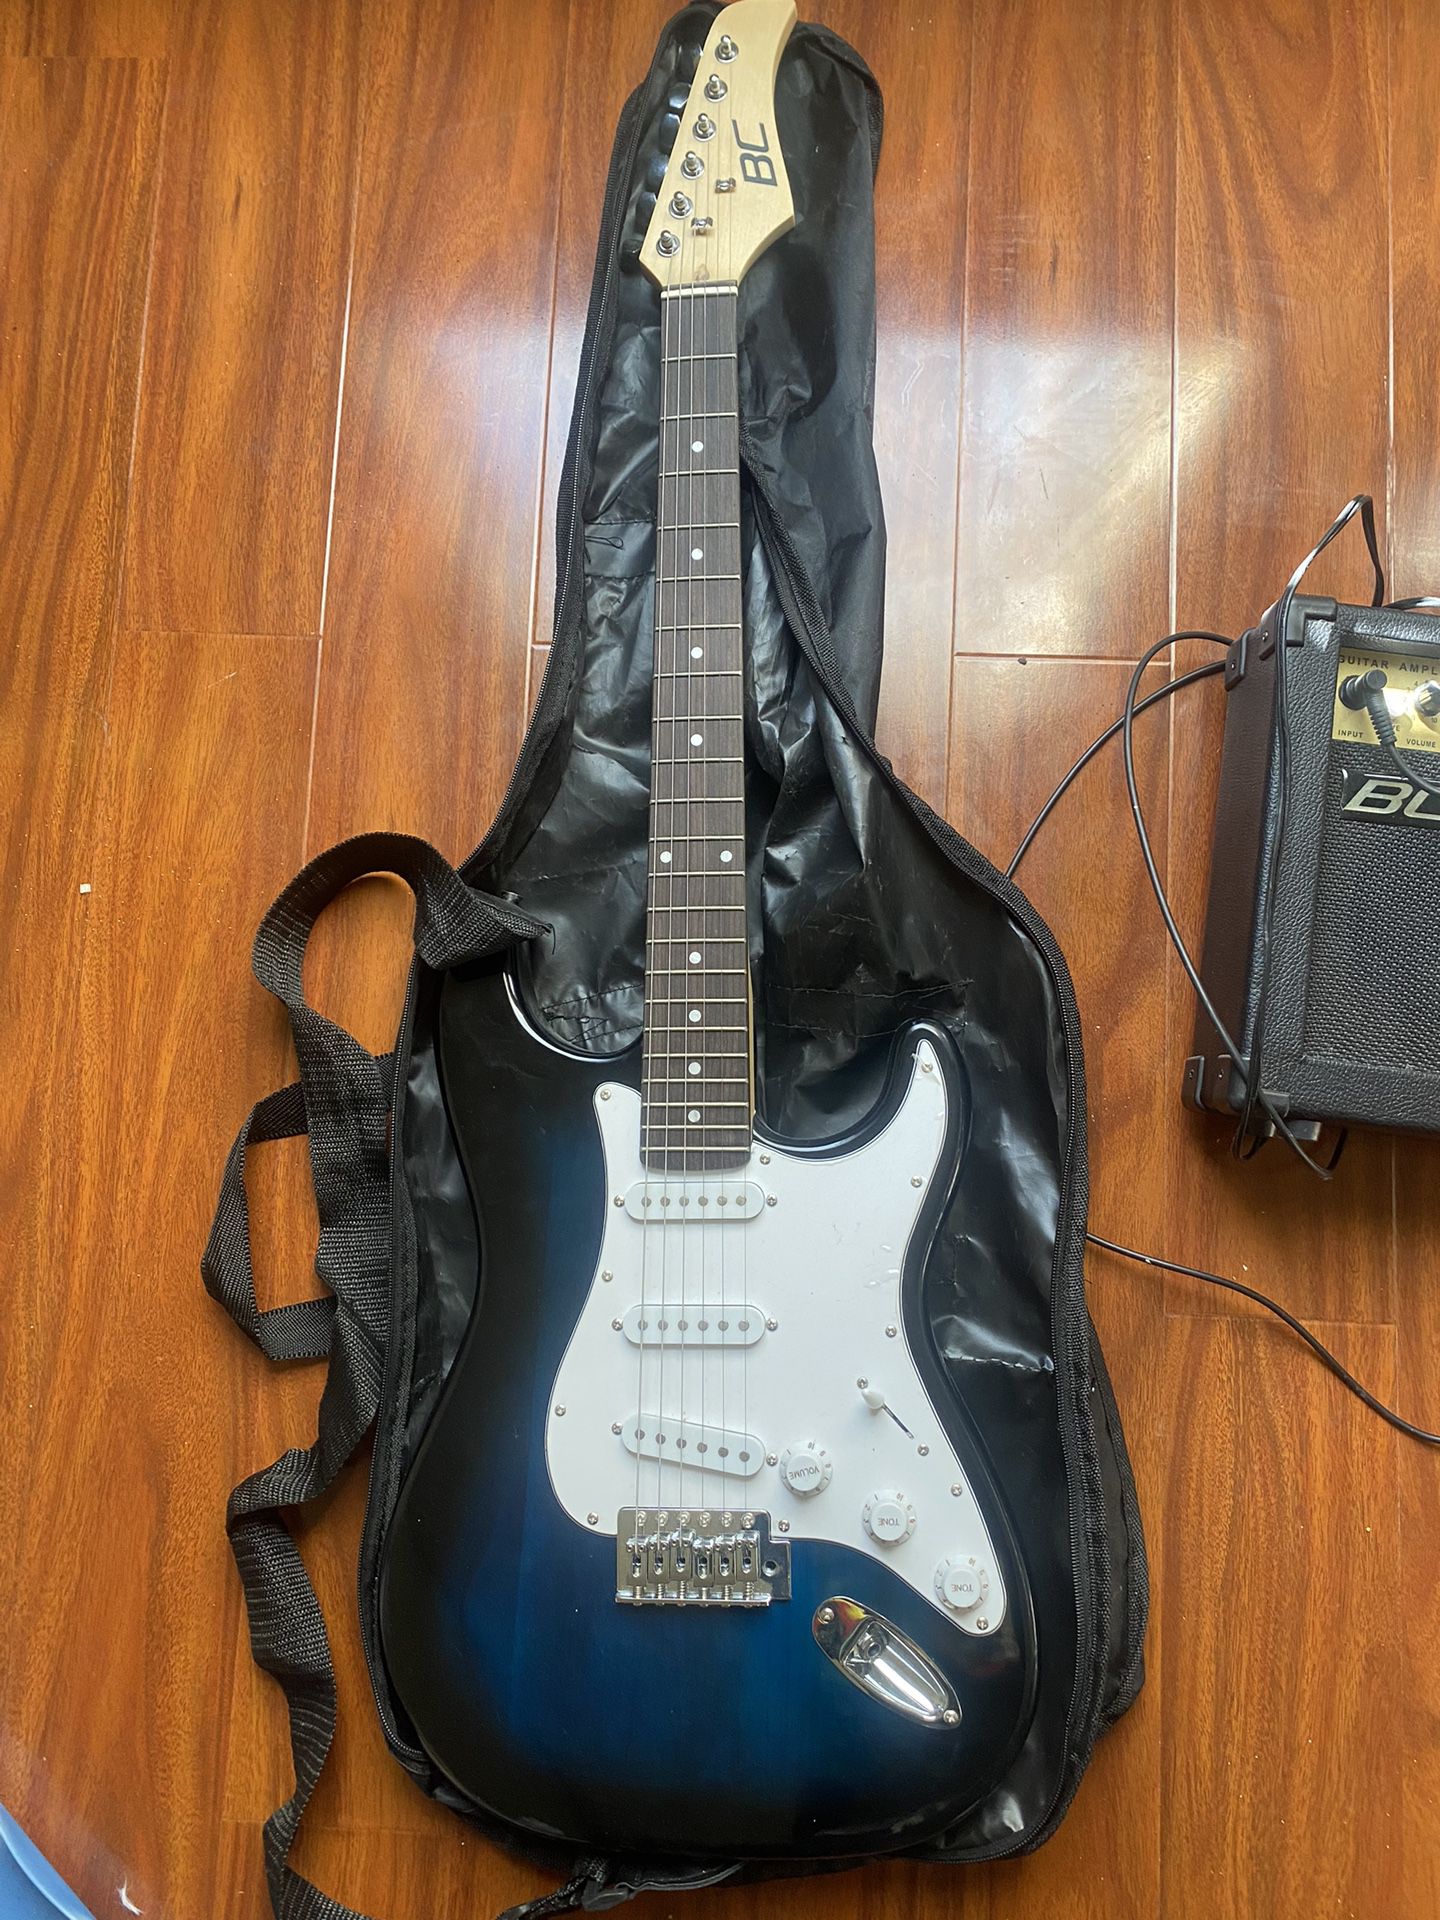 bc electric guitar with bc amp